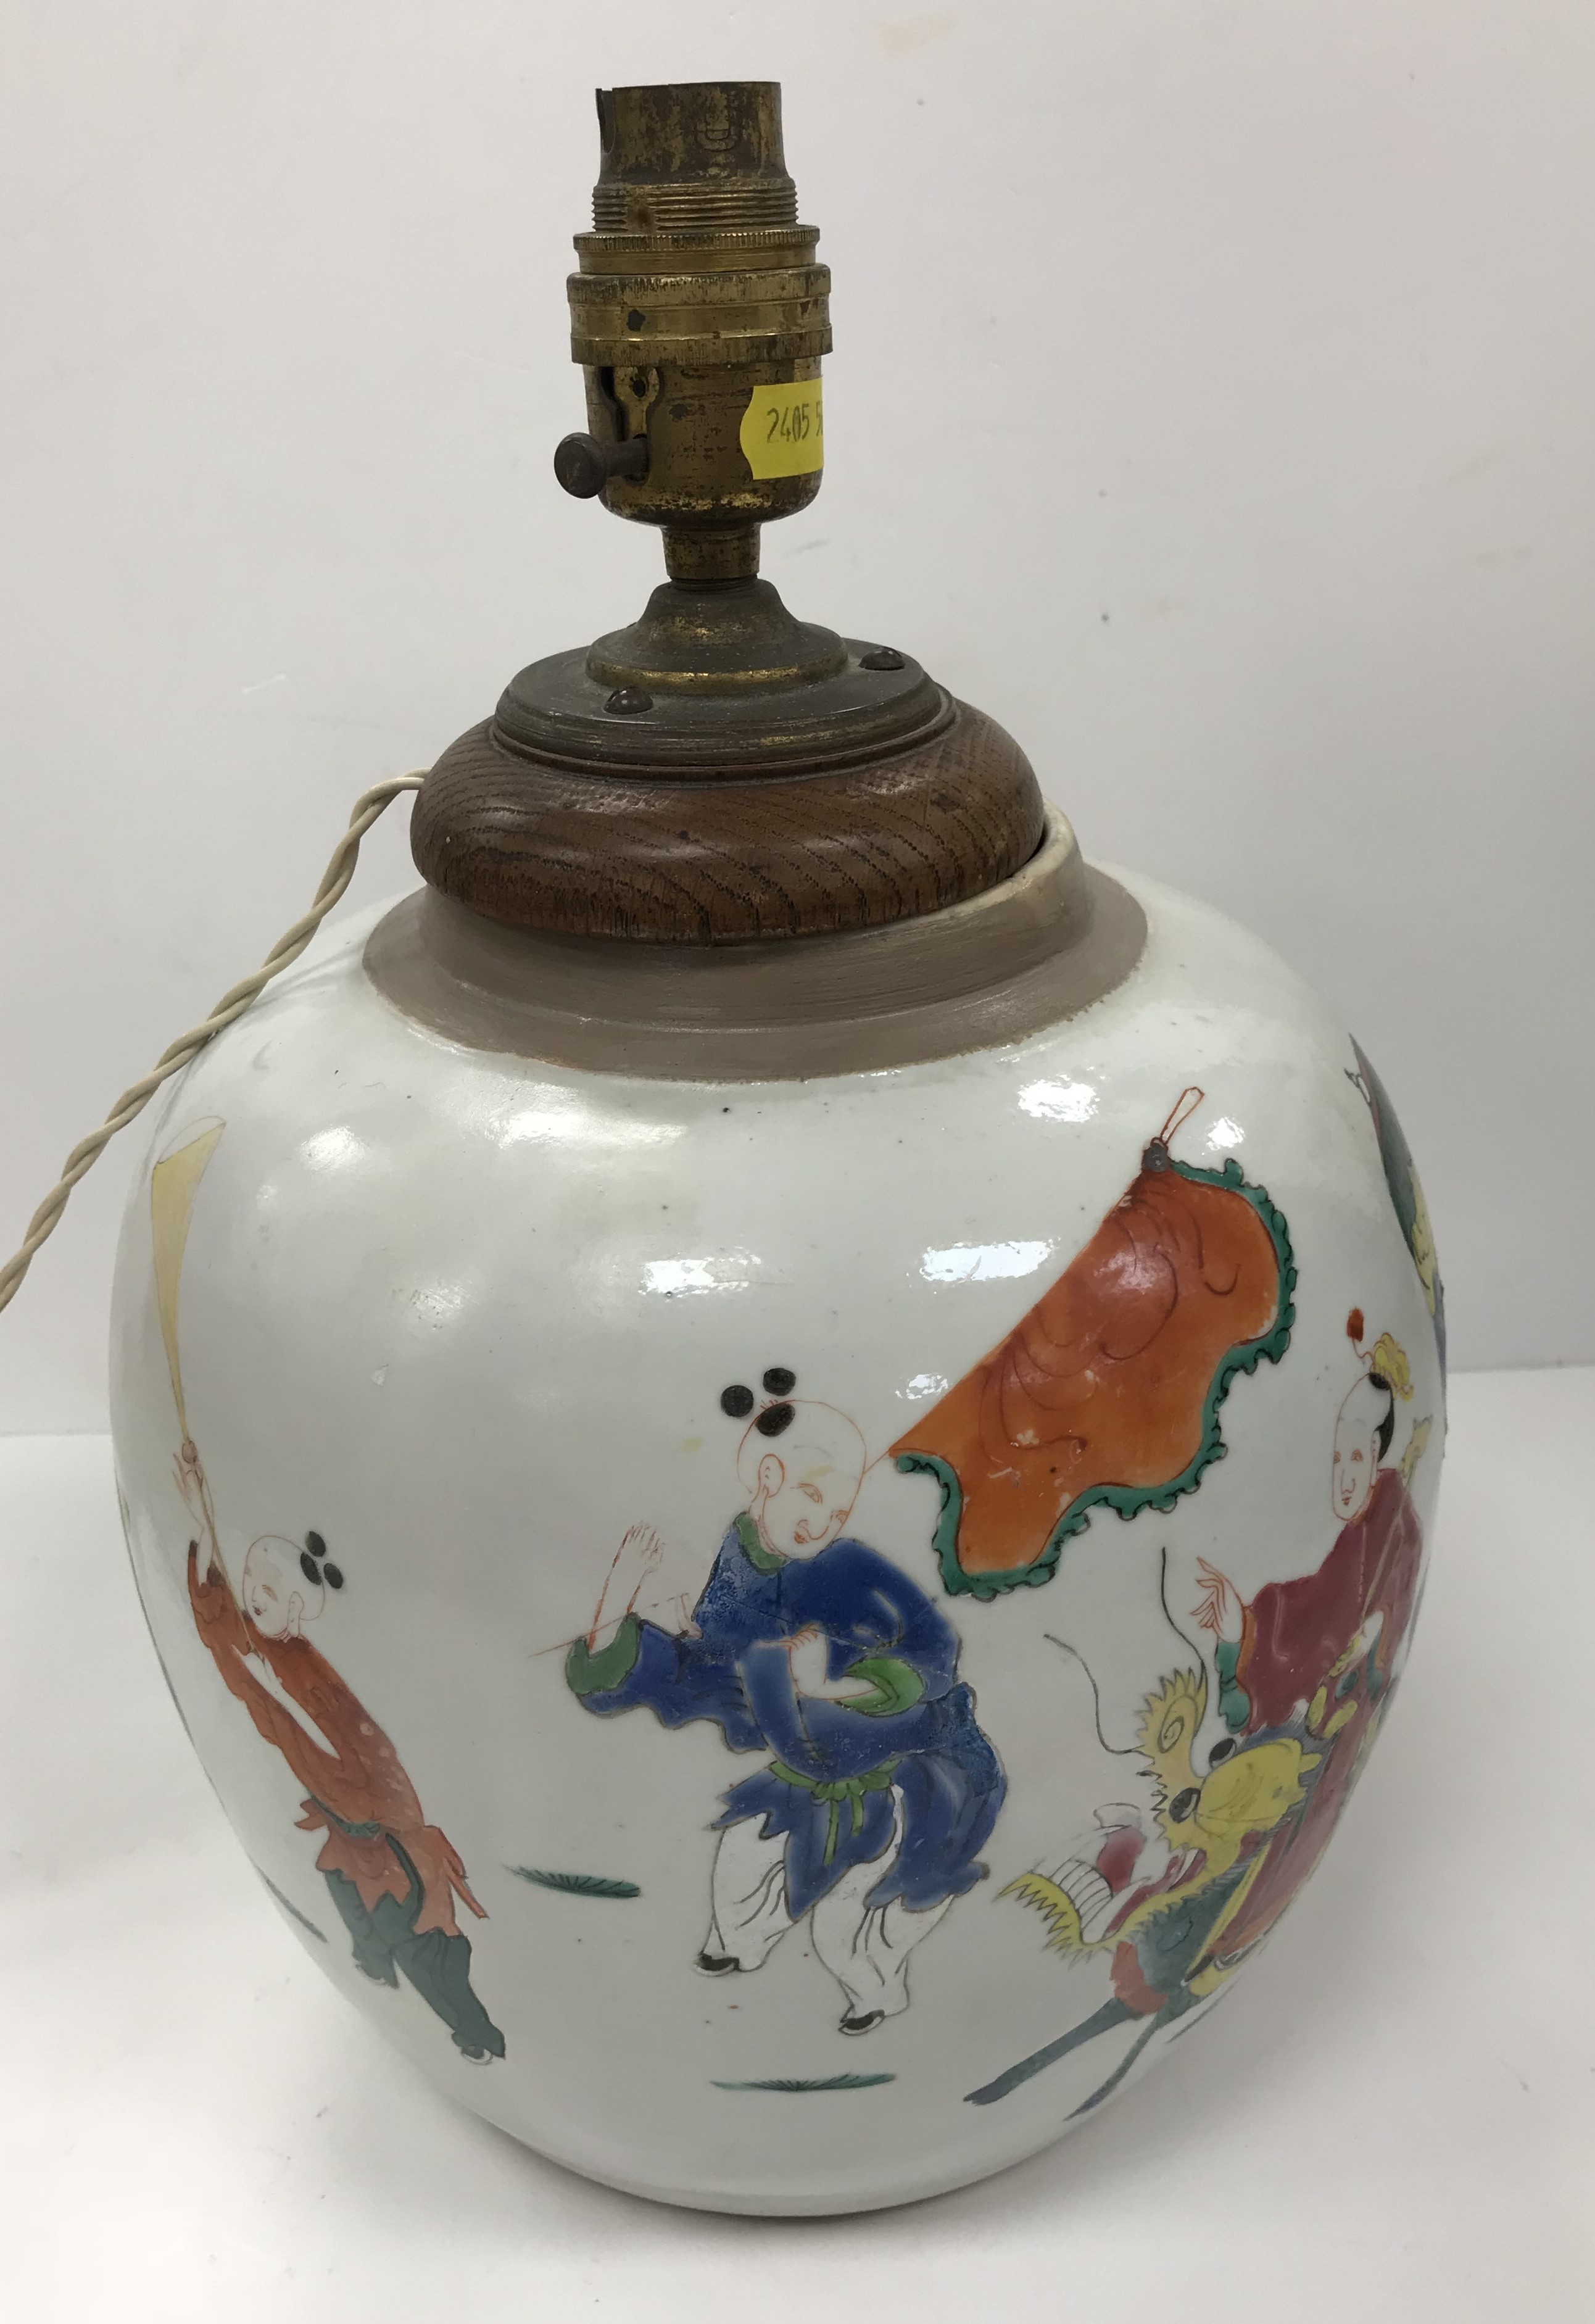 A Chinese polychrome decorated ginger jar of large proportions in the Yong Zheng manner,